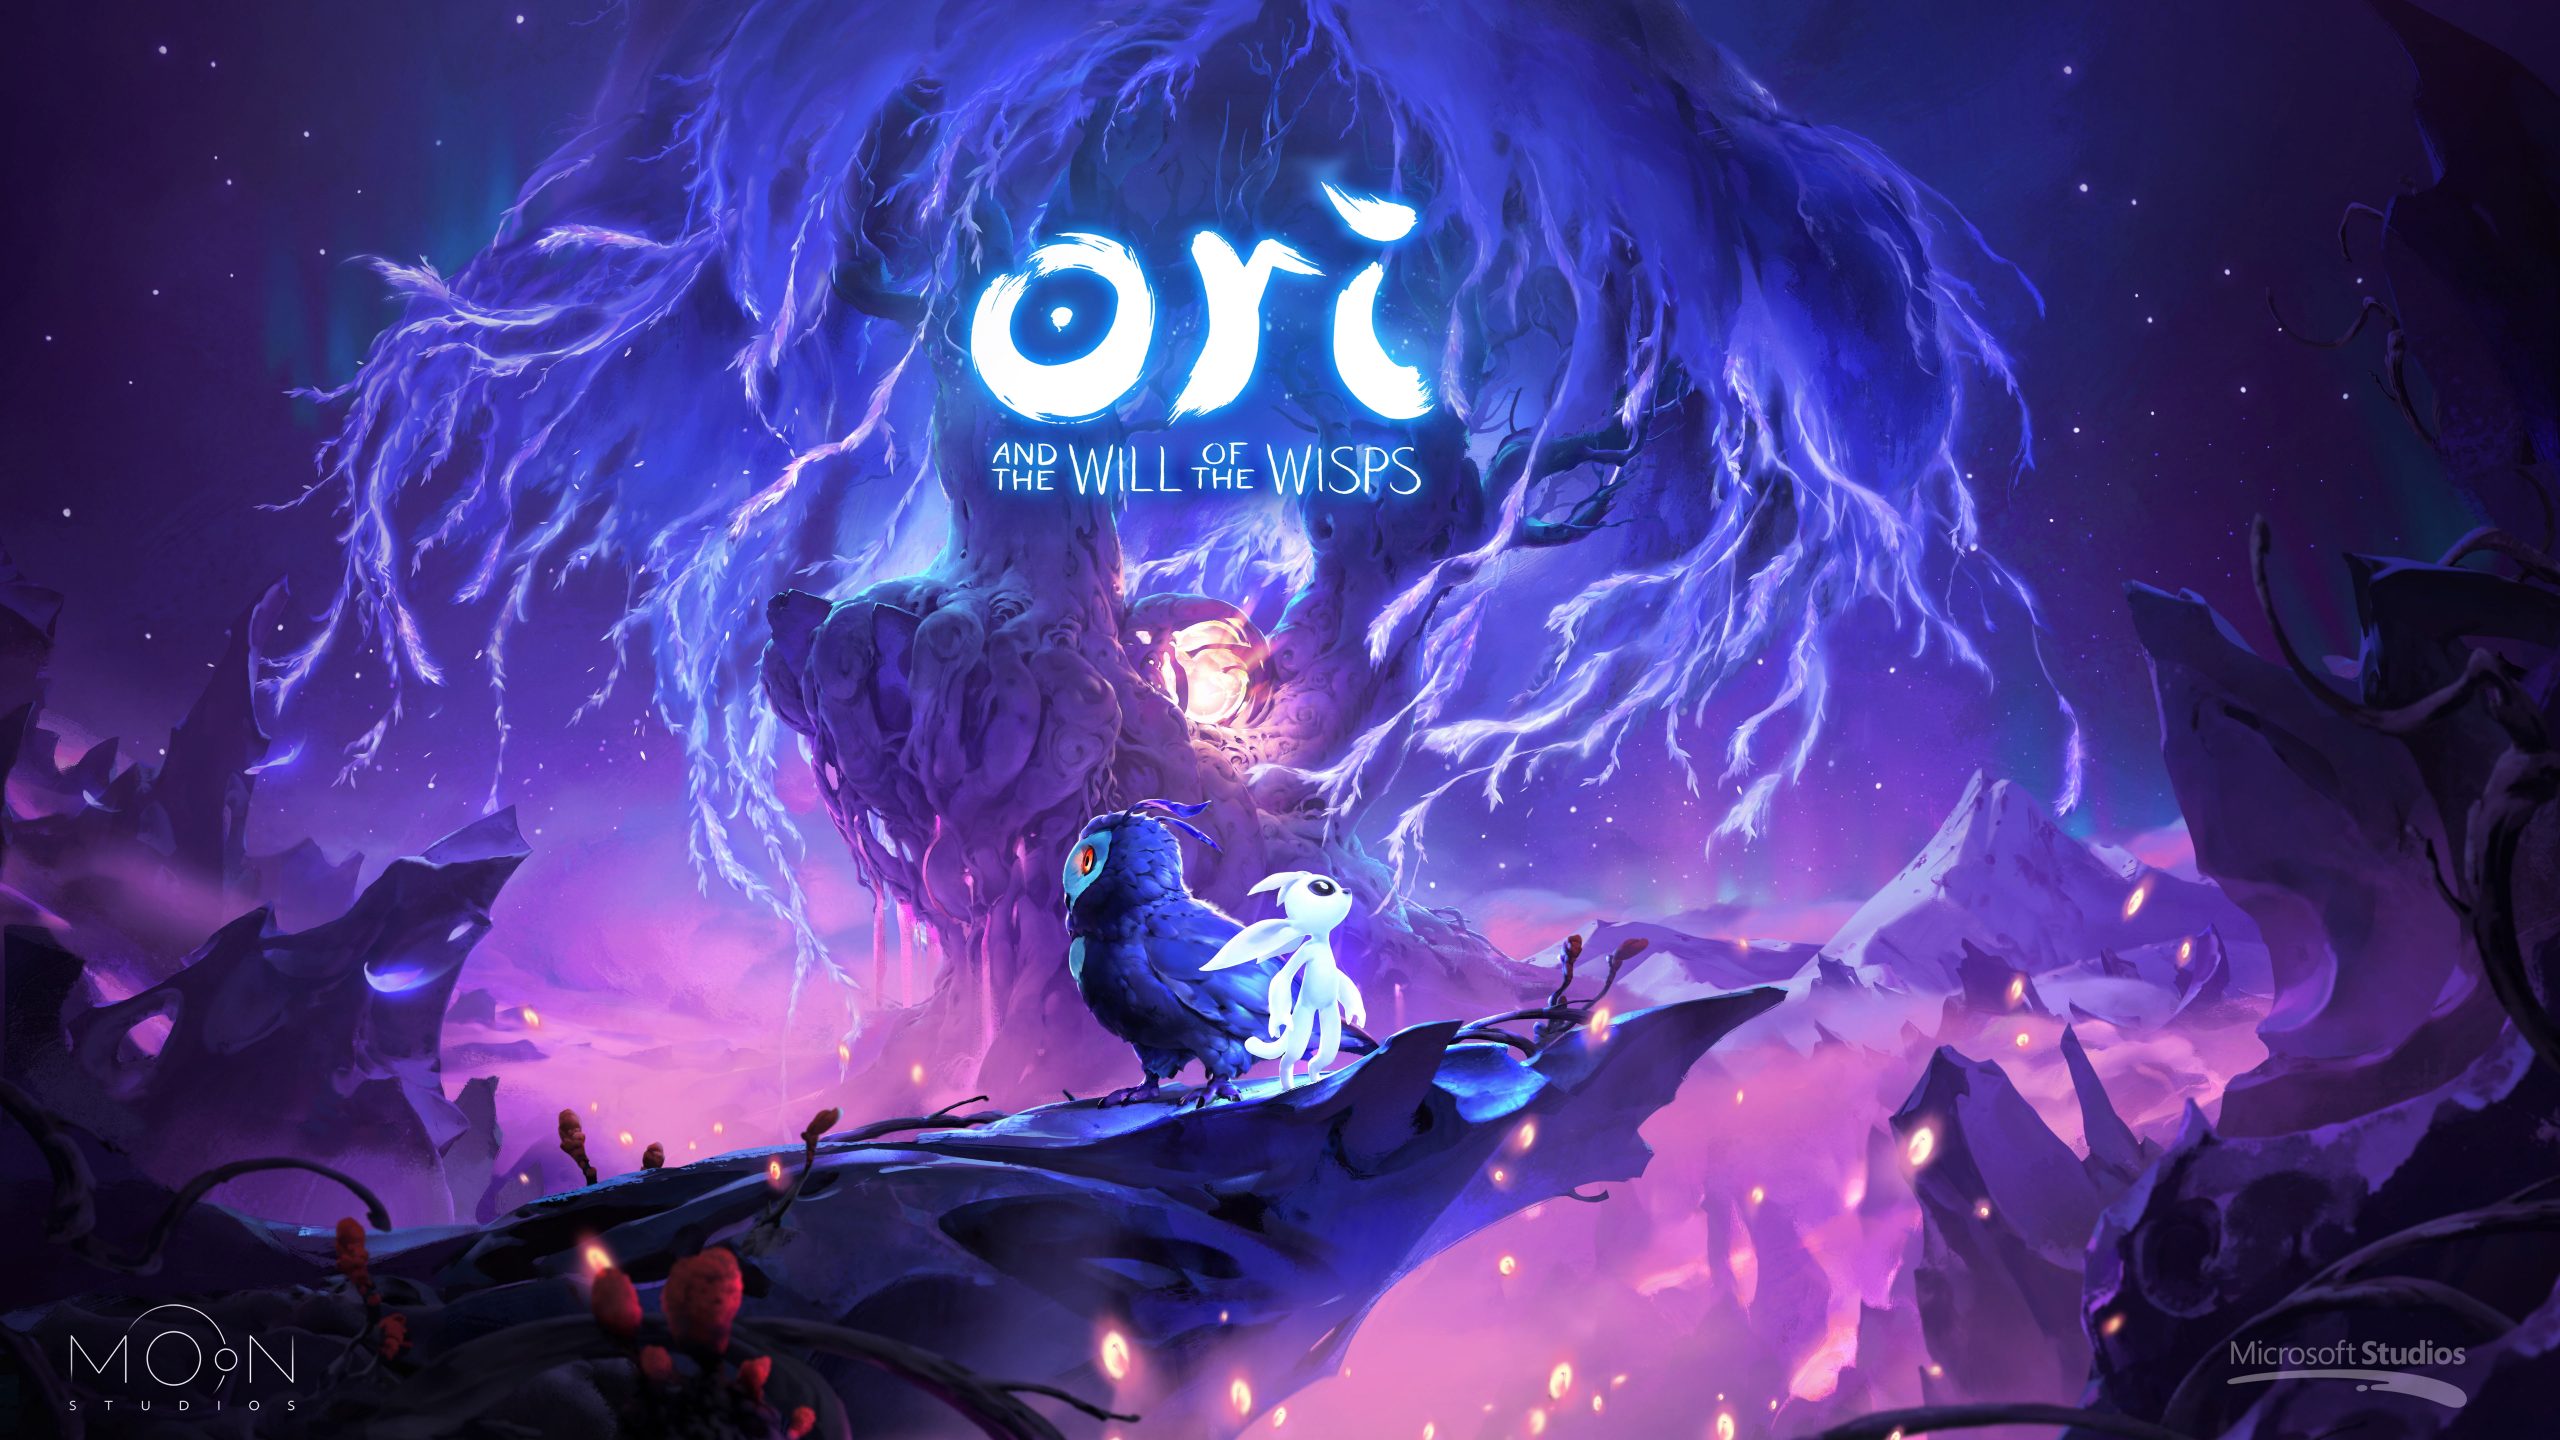 Wallpaper Ori And The Will Of The Wisps, Pc Games, 8k, 4k - Wallpaperforu